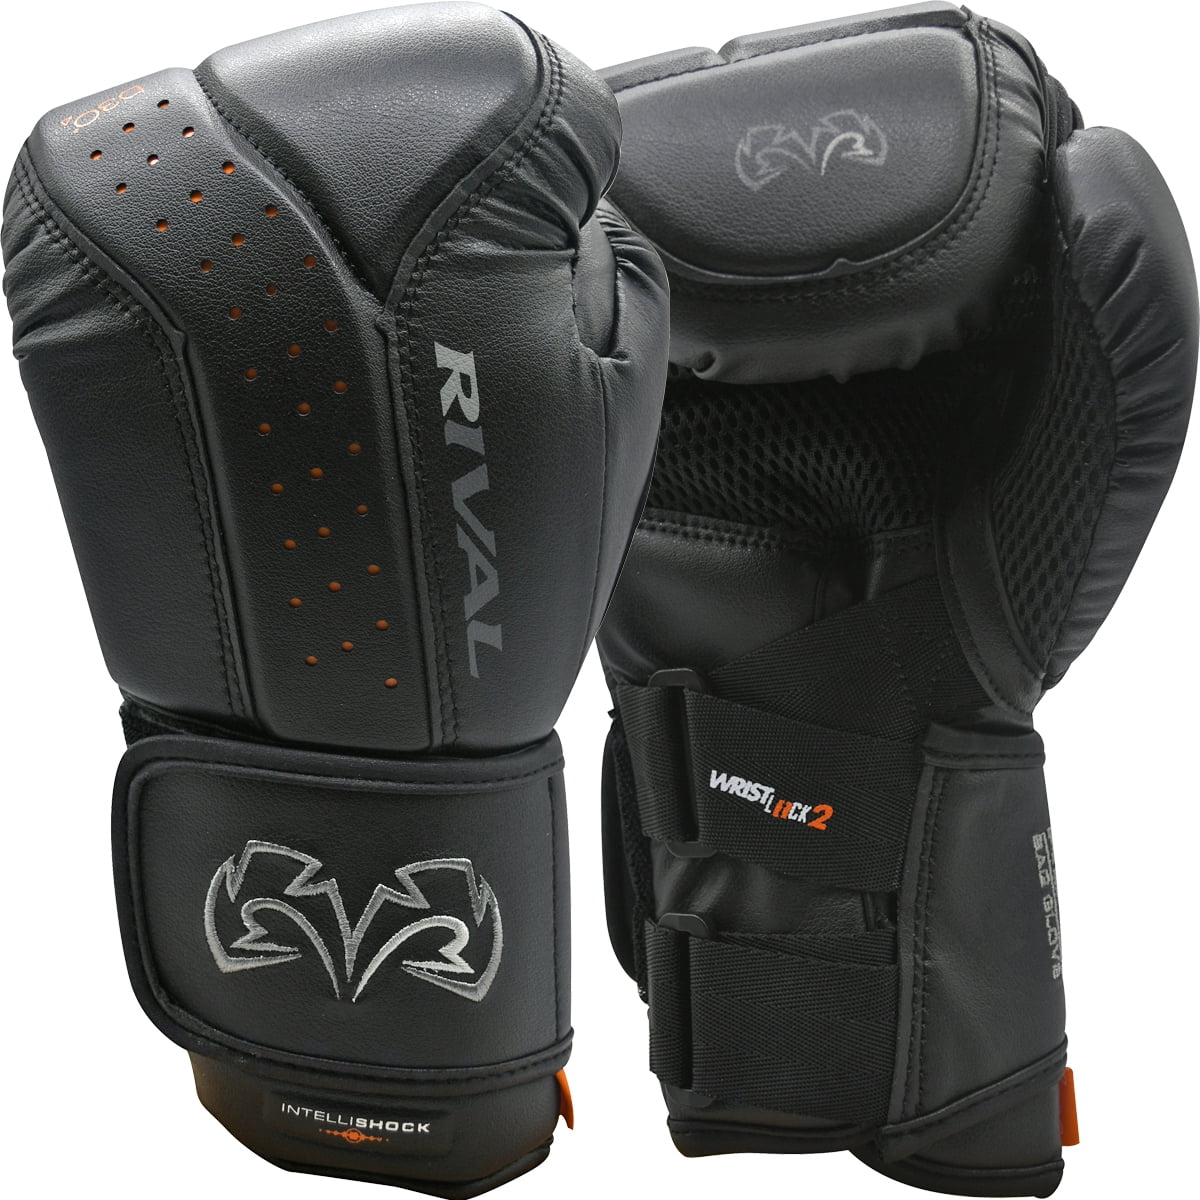 Rival Boxing RB10 Intelli Shock Bag Gloves Black Red Pads Mitts Boxing Training 